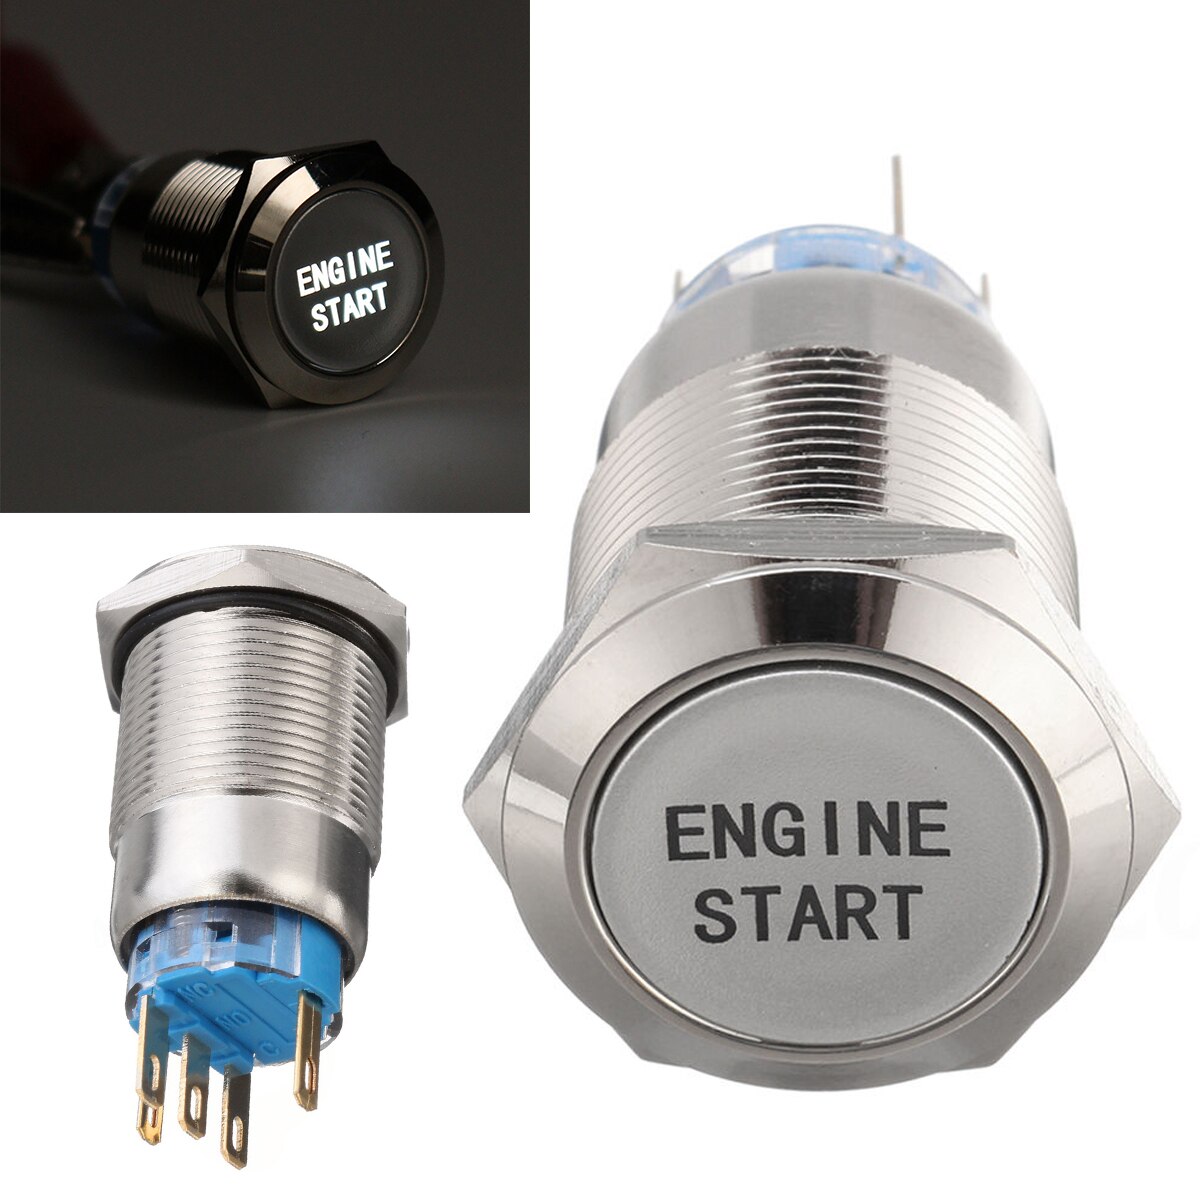 12V 19mm Waterproof Car Metal Momentary Engine Start Push Button Switch LED